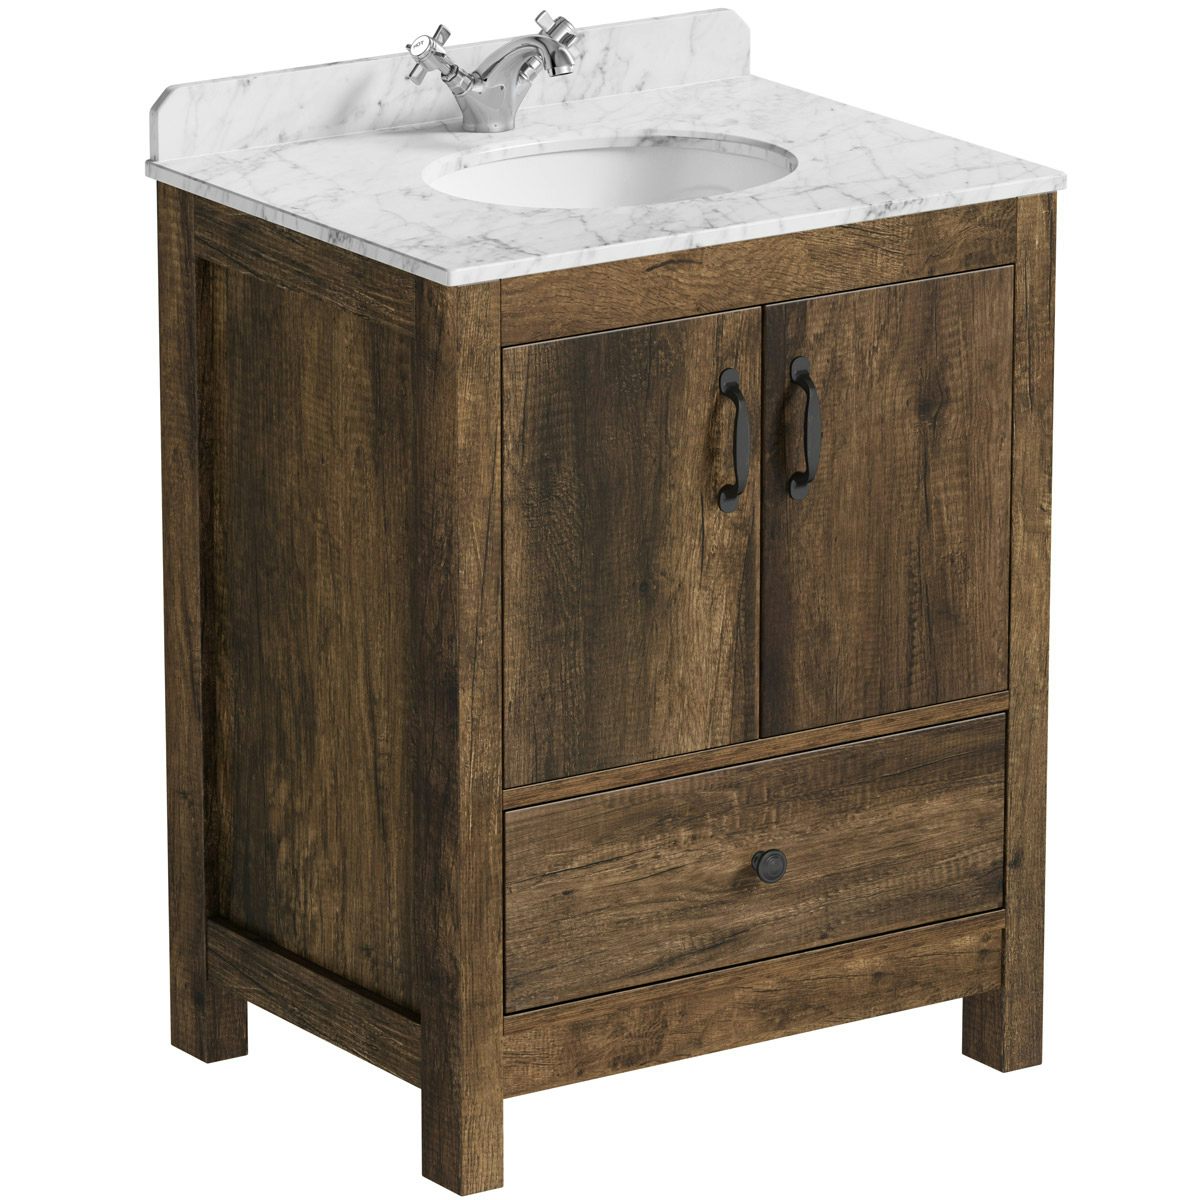 White Marble Basin 650mm, Wooden Double Vanity Unit